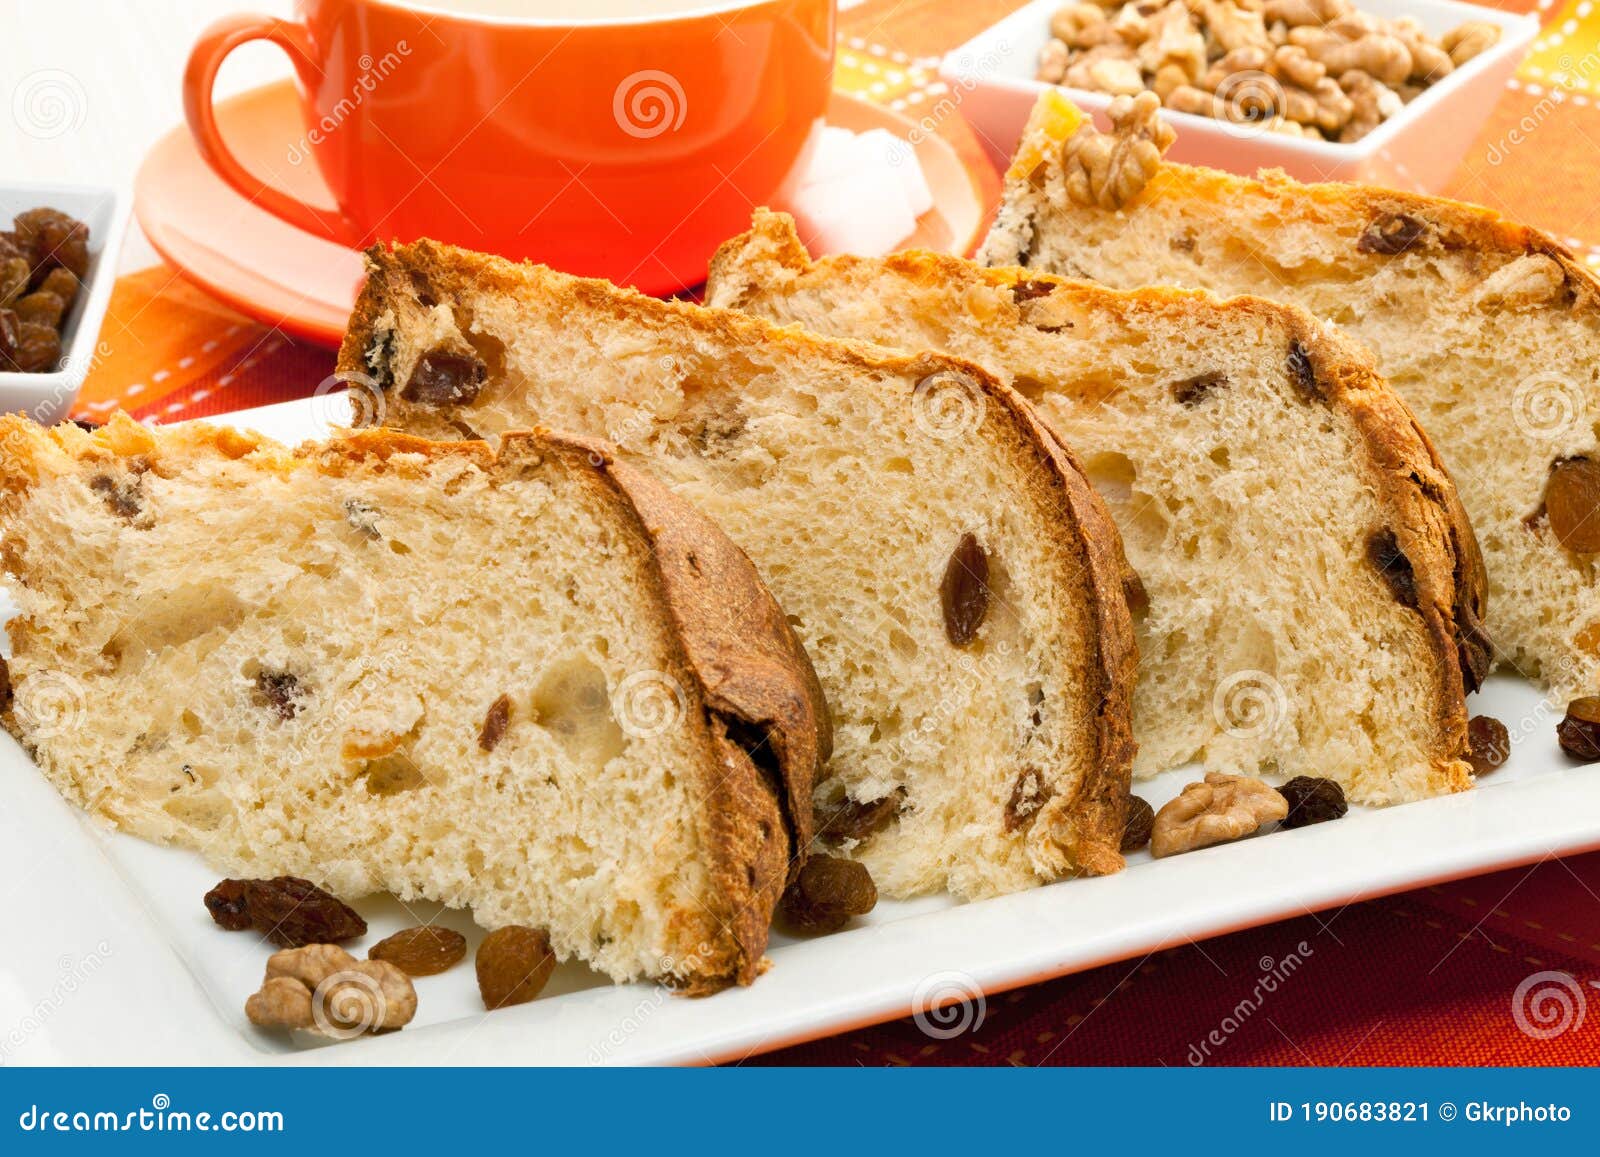 Italian Cake with Nuts and Raisins Stock Image - Image of breakfast ...